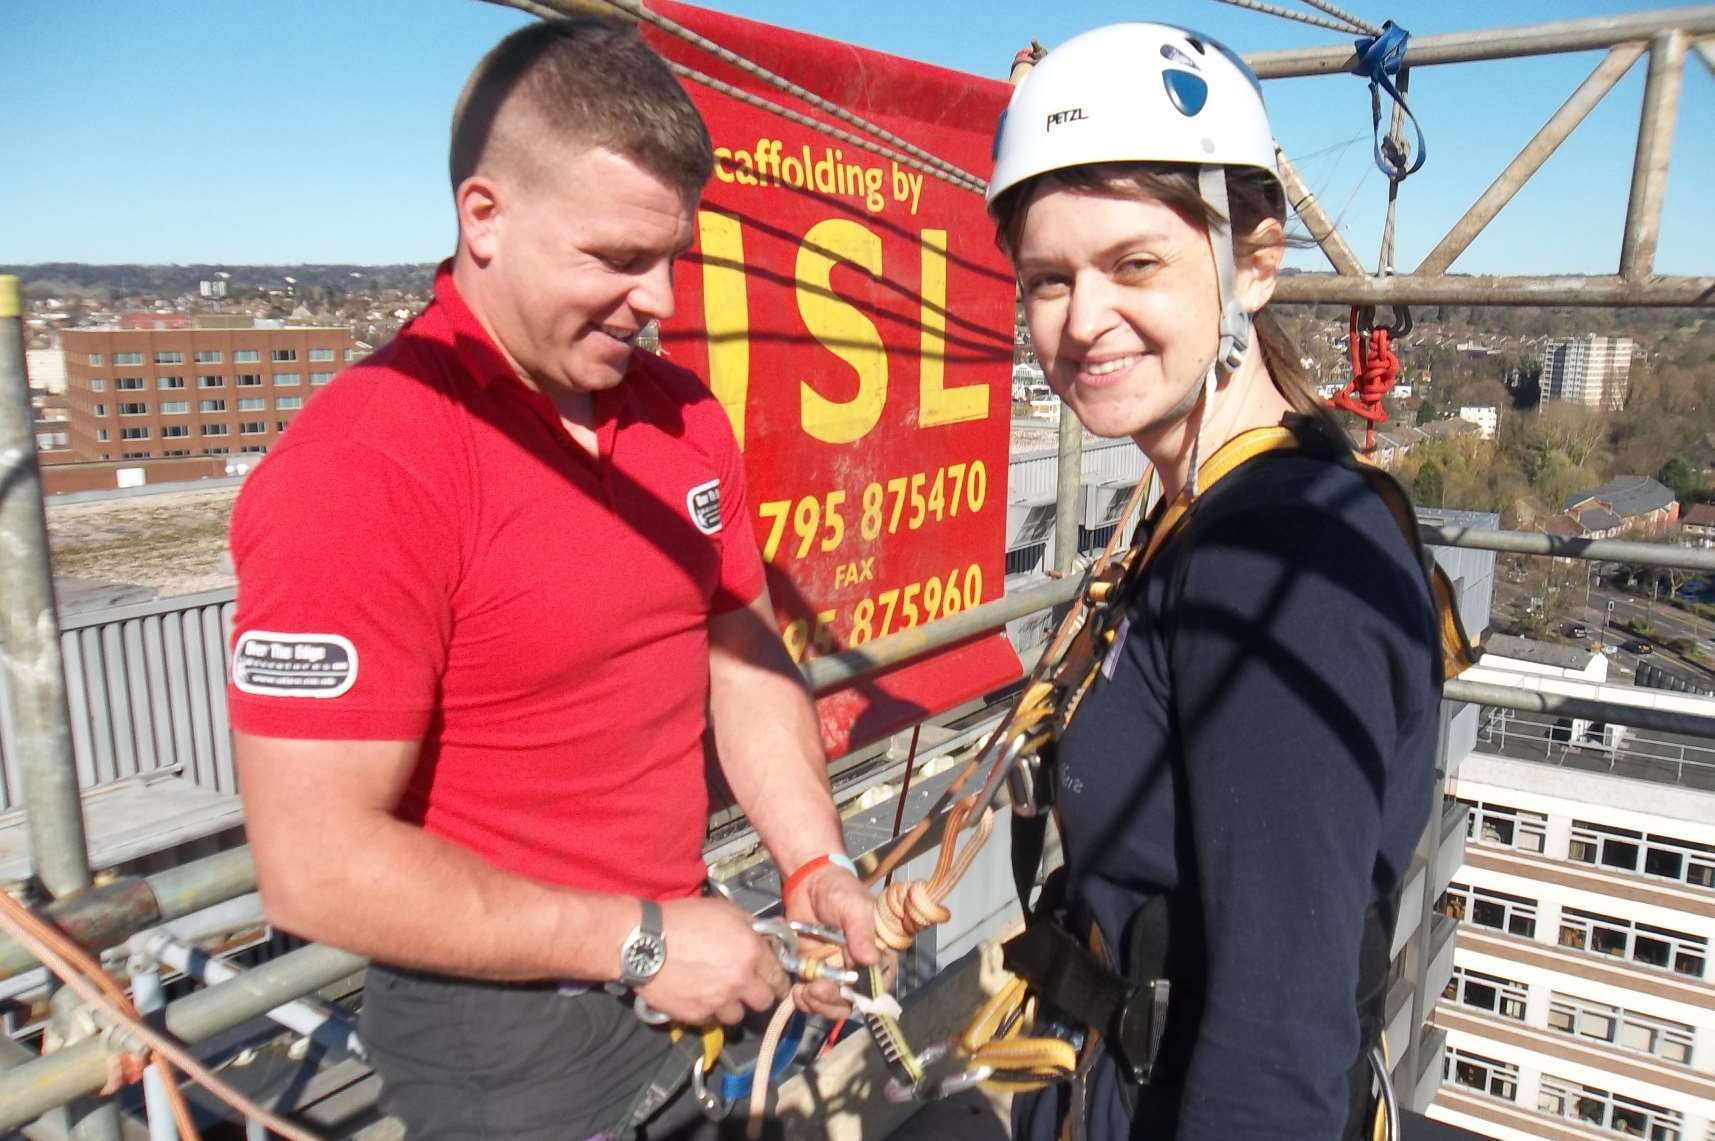 Ann-Marie Langley of Maidstone from event sponsor DSH being briefed by abseil instructor Joe Lovelock.